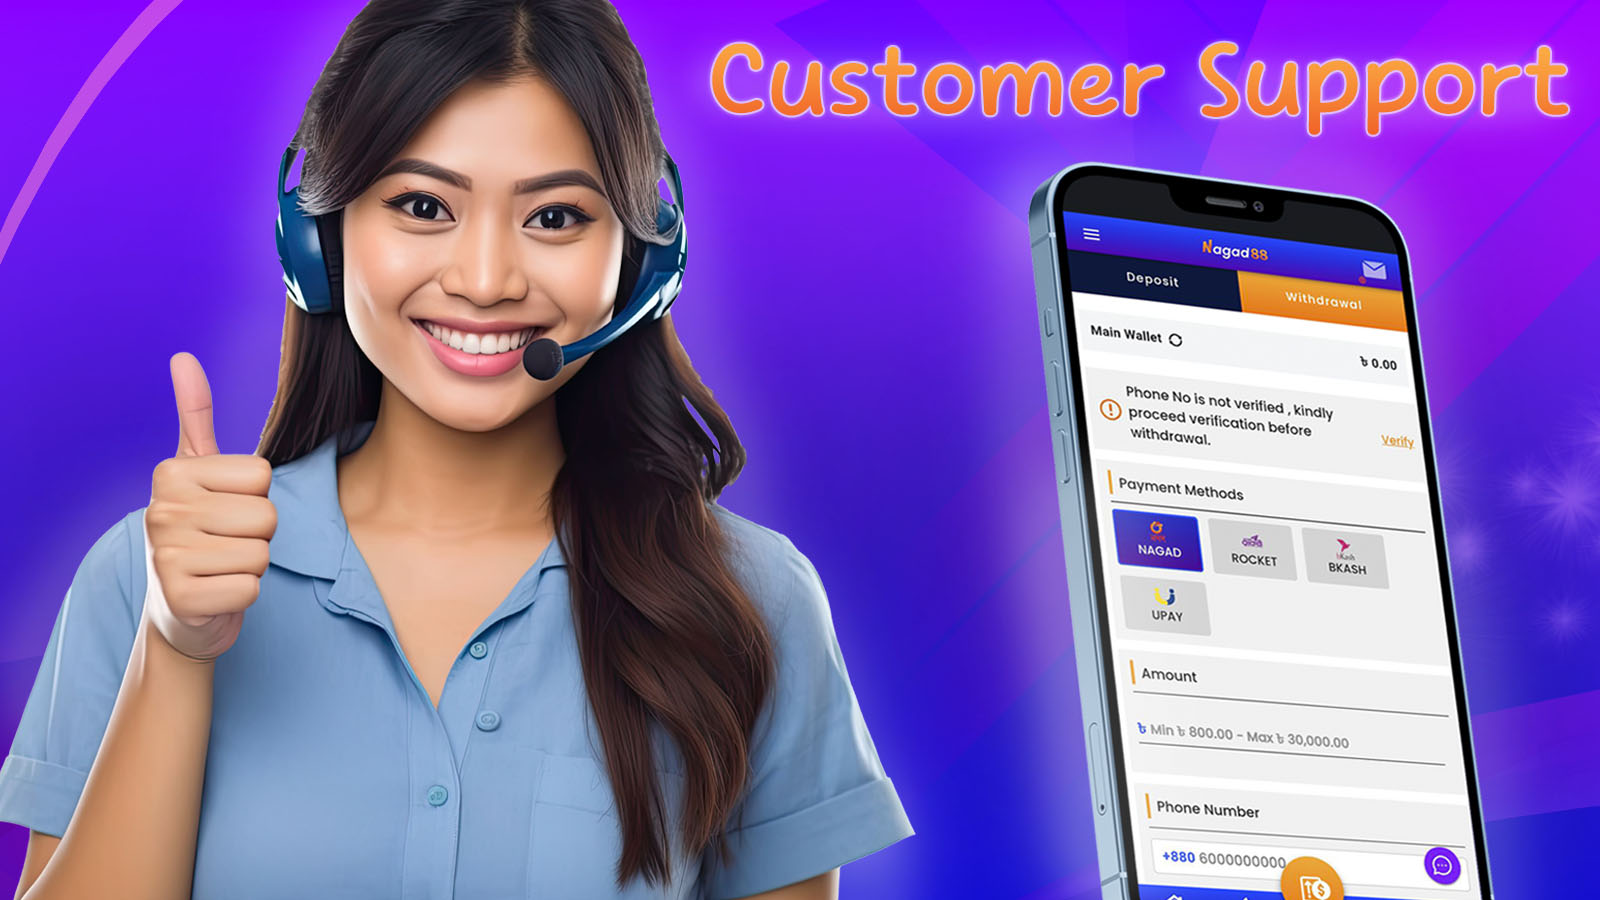 Nagad88 Customer Service is ready to help you with withdrawing money